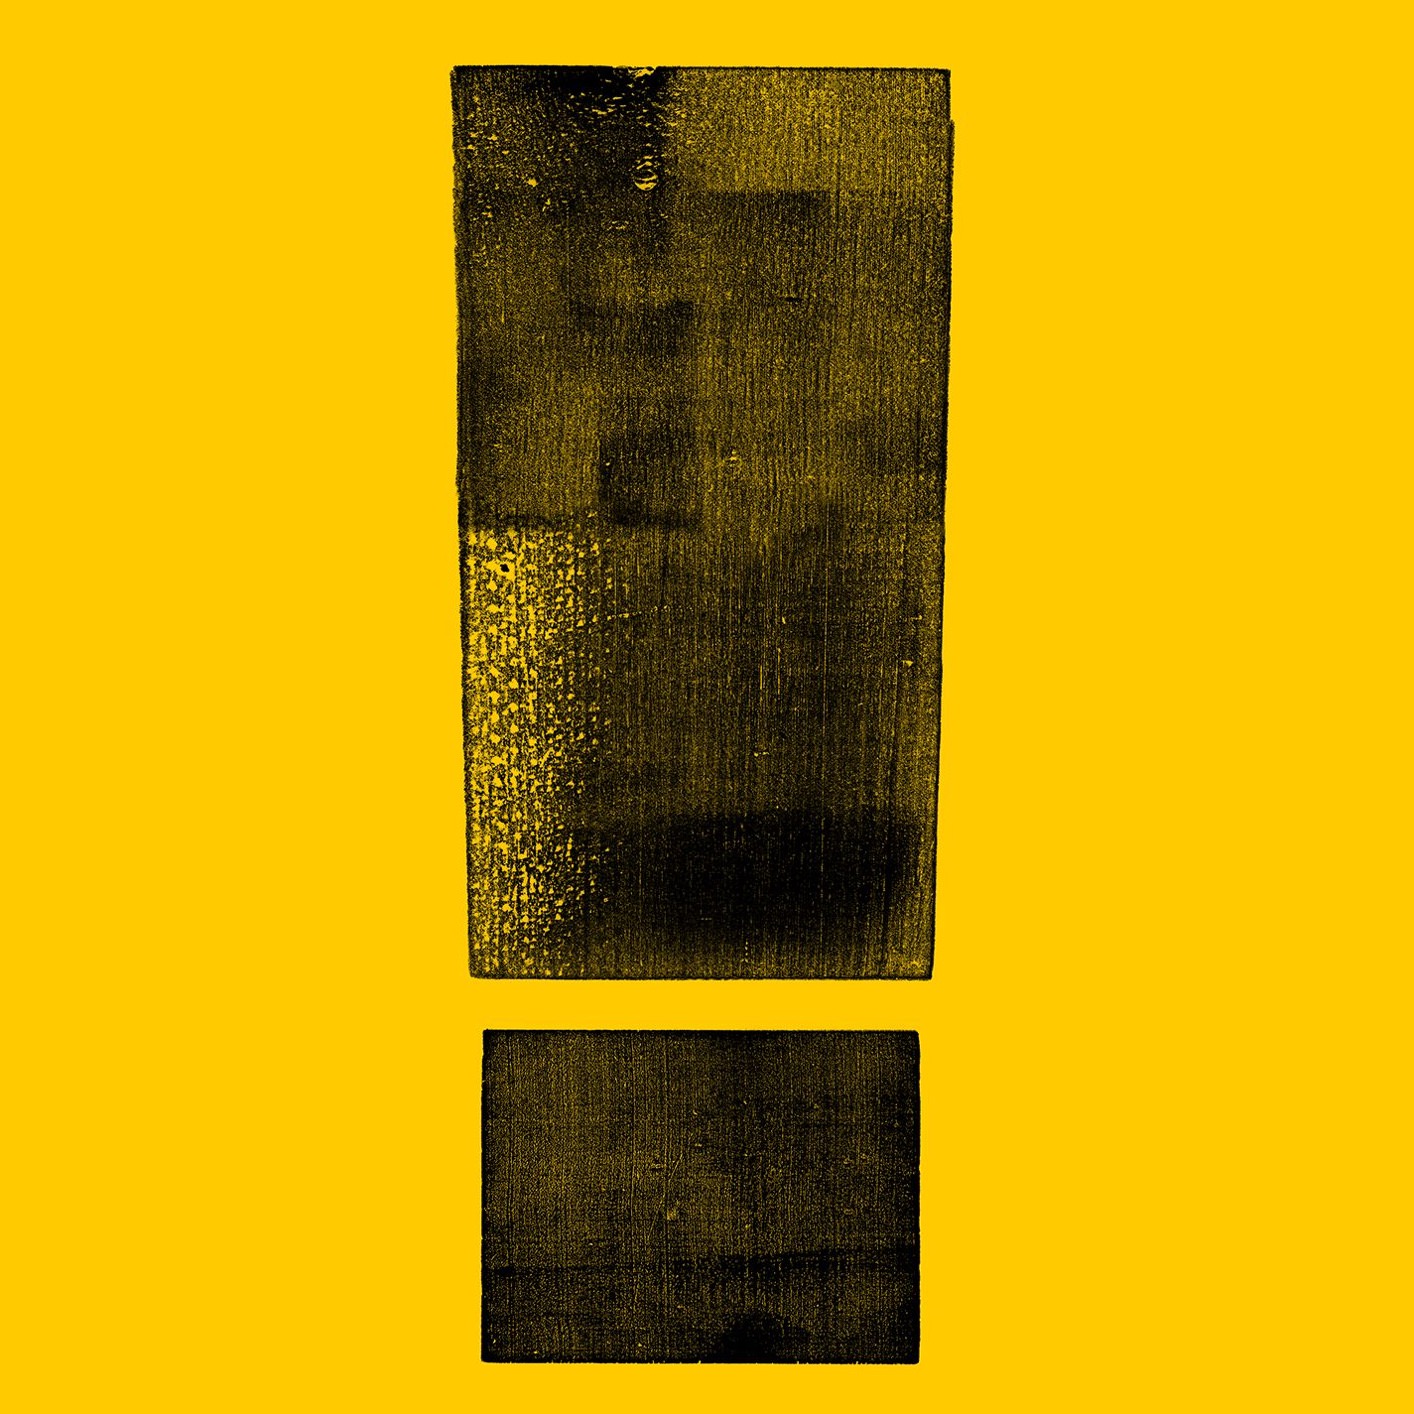 Shinedown - Attention Attention (2018) [HDTracks FLAC 24bit/48kHz]